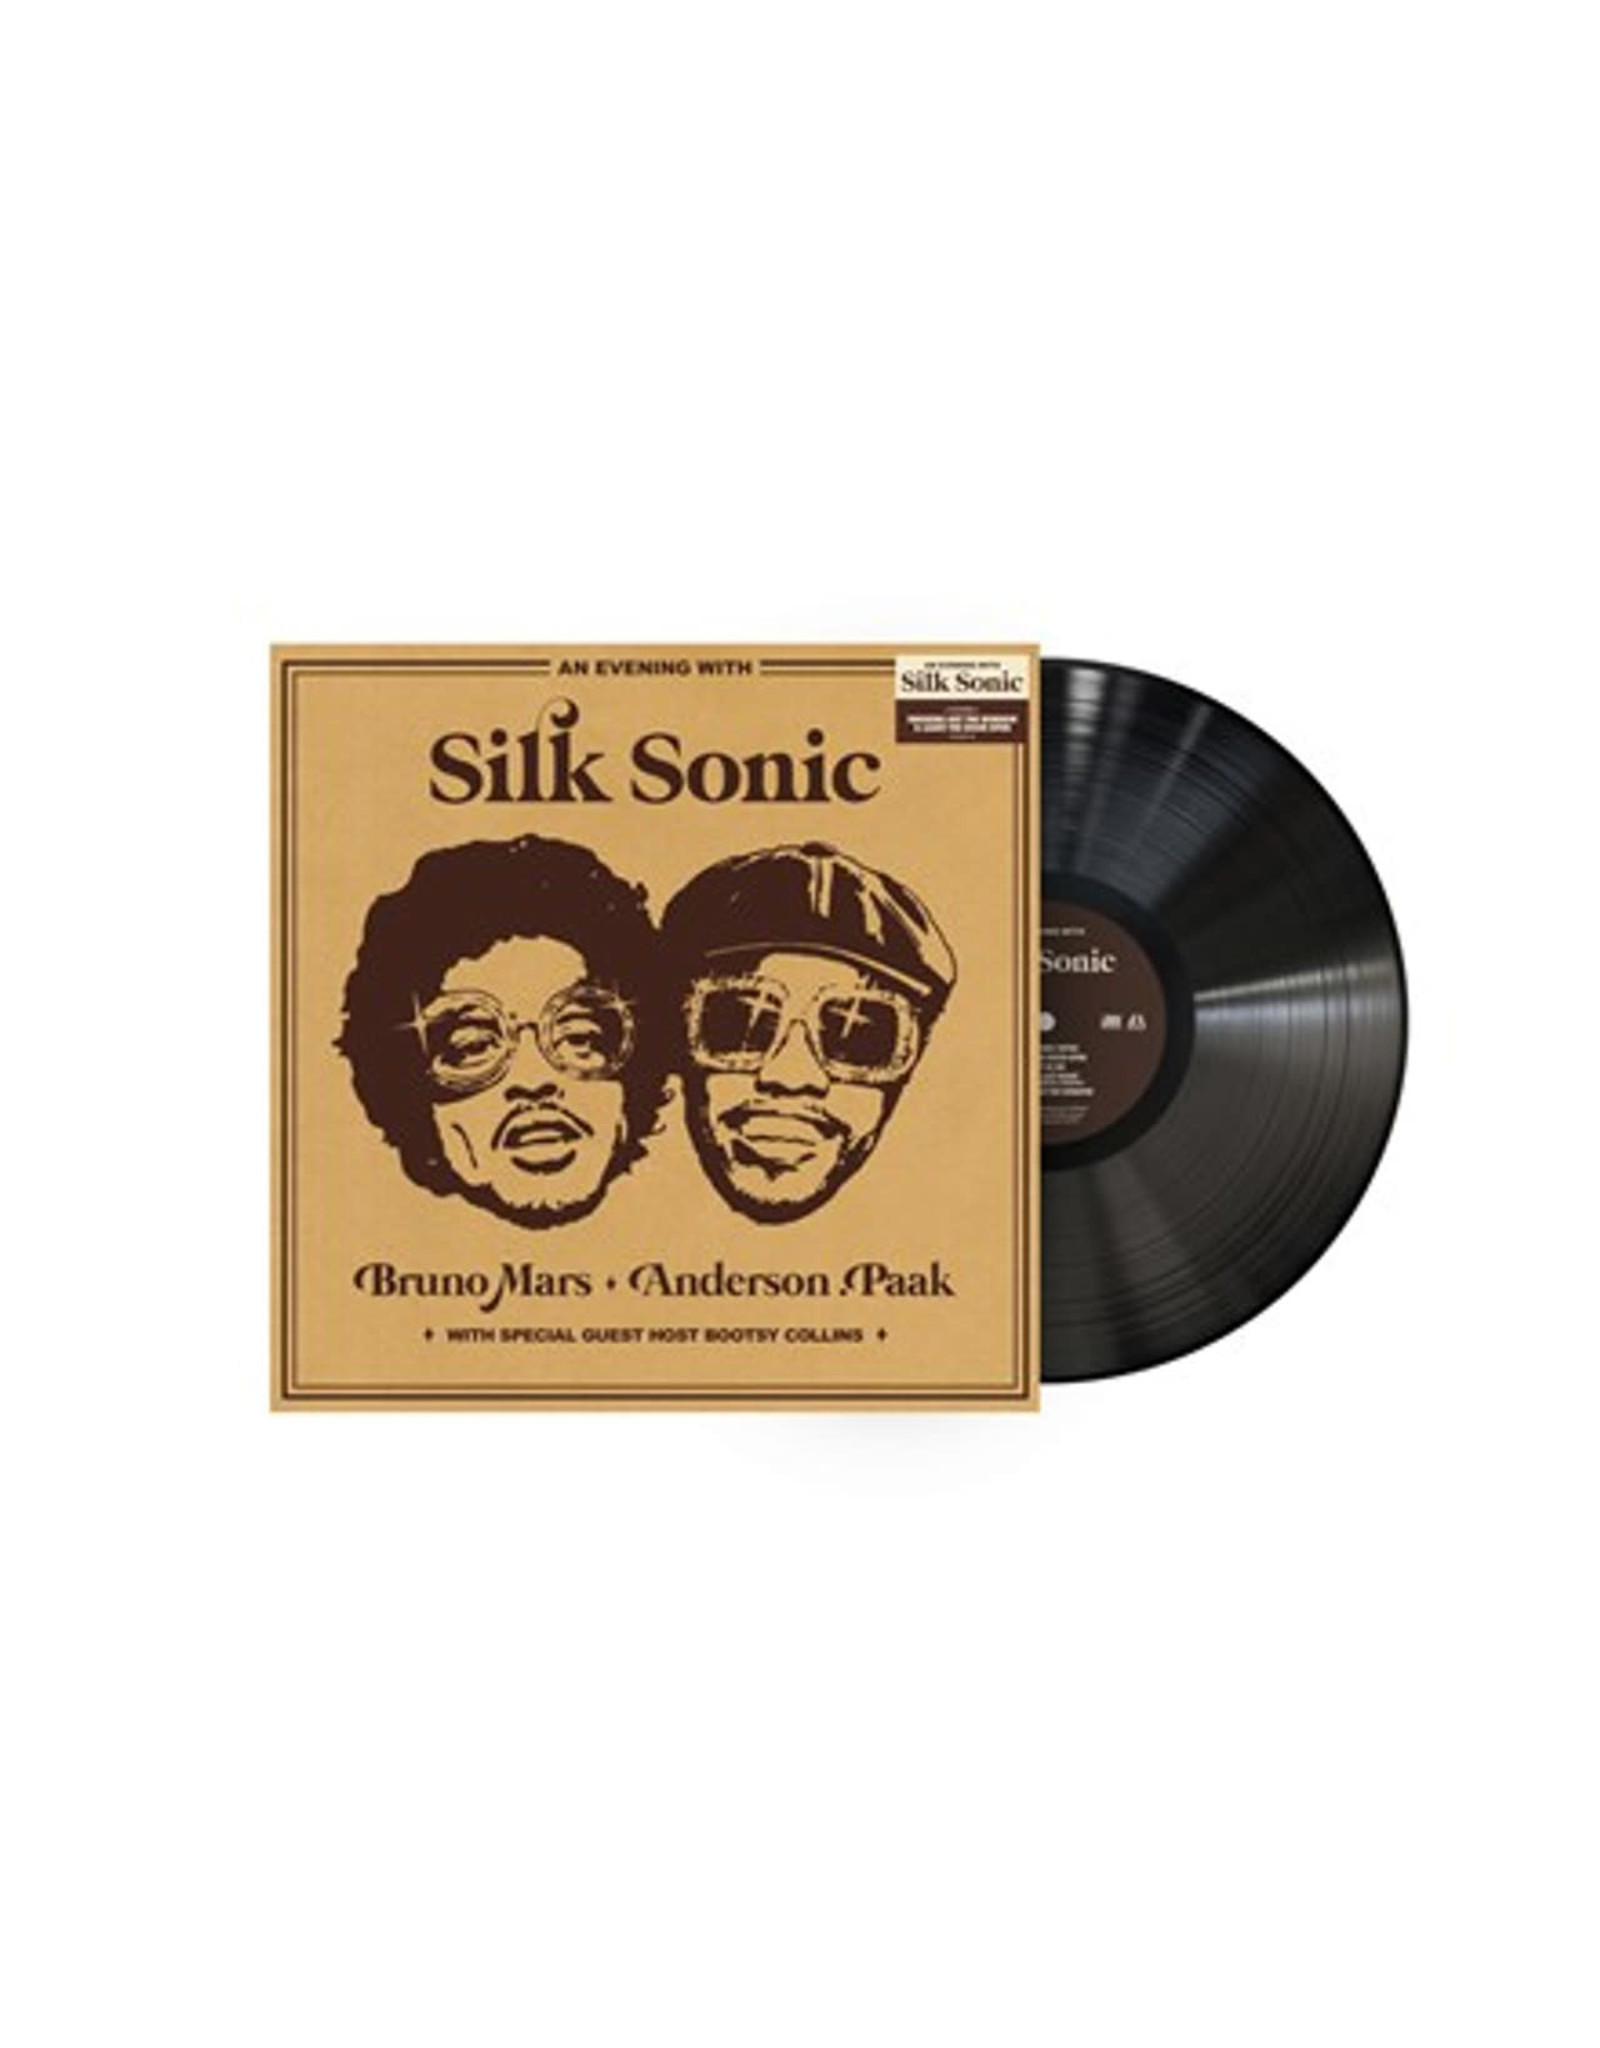 Atlantic Anderson .Paak, Silk Sonic Bruno Mars: An Evening With Silk Sonic (Deluxe) LP